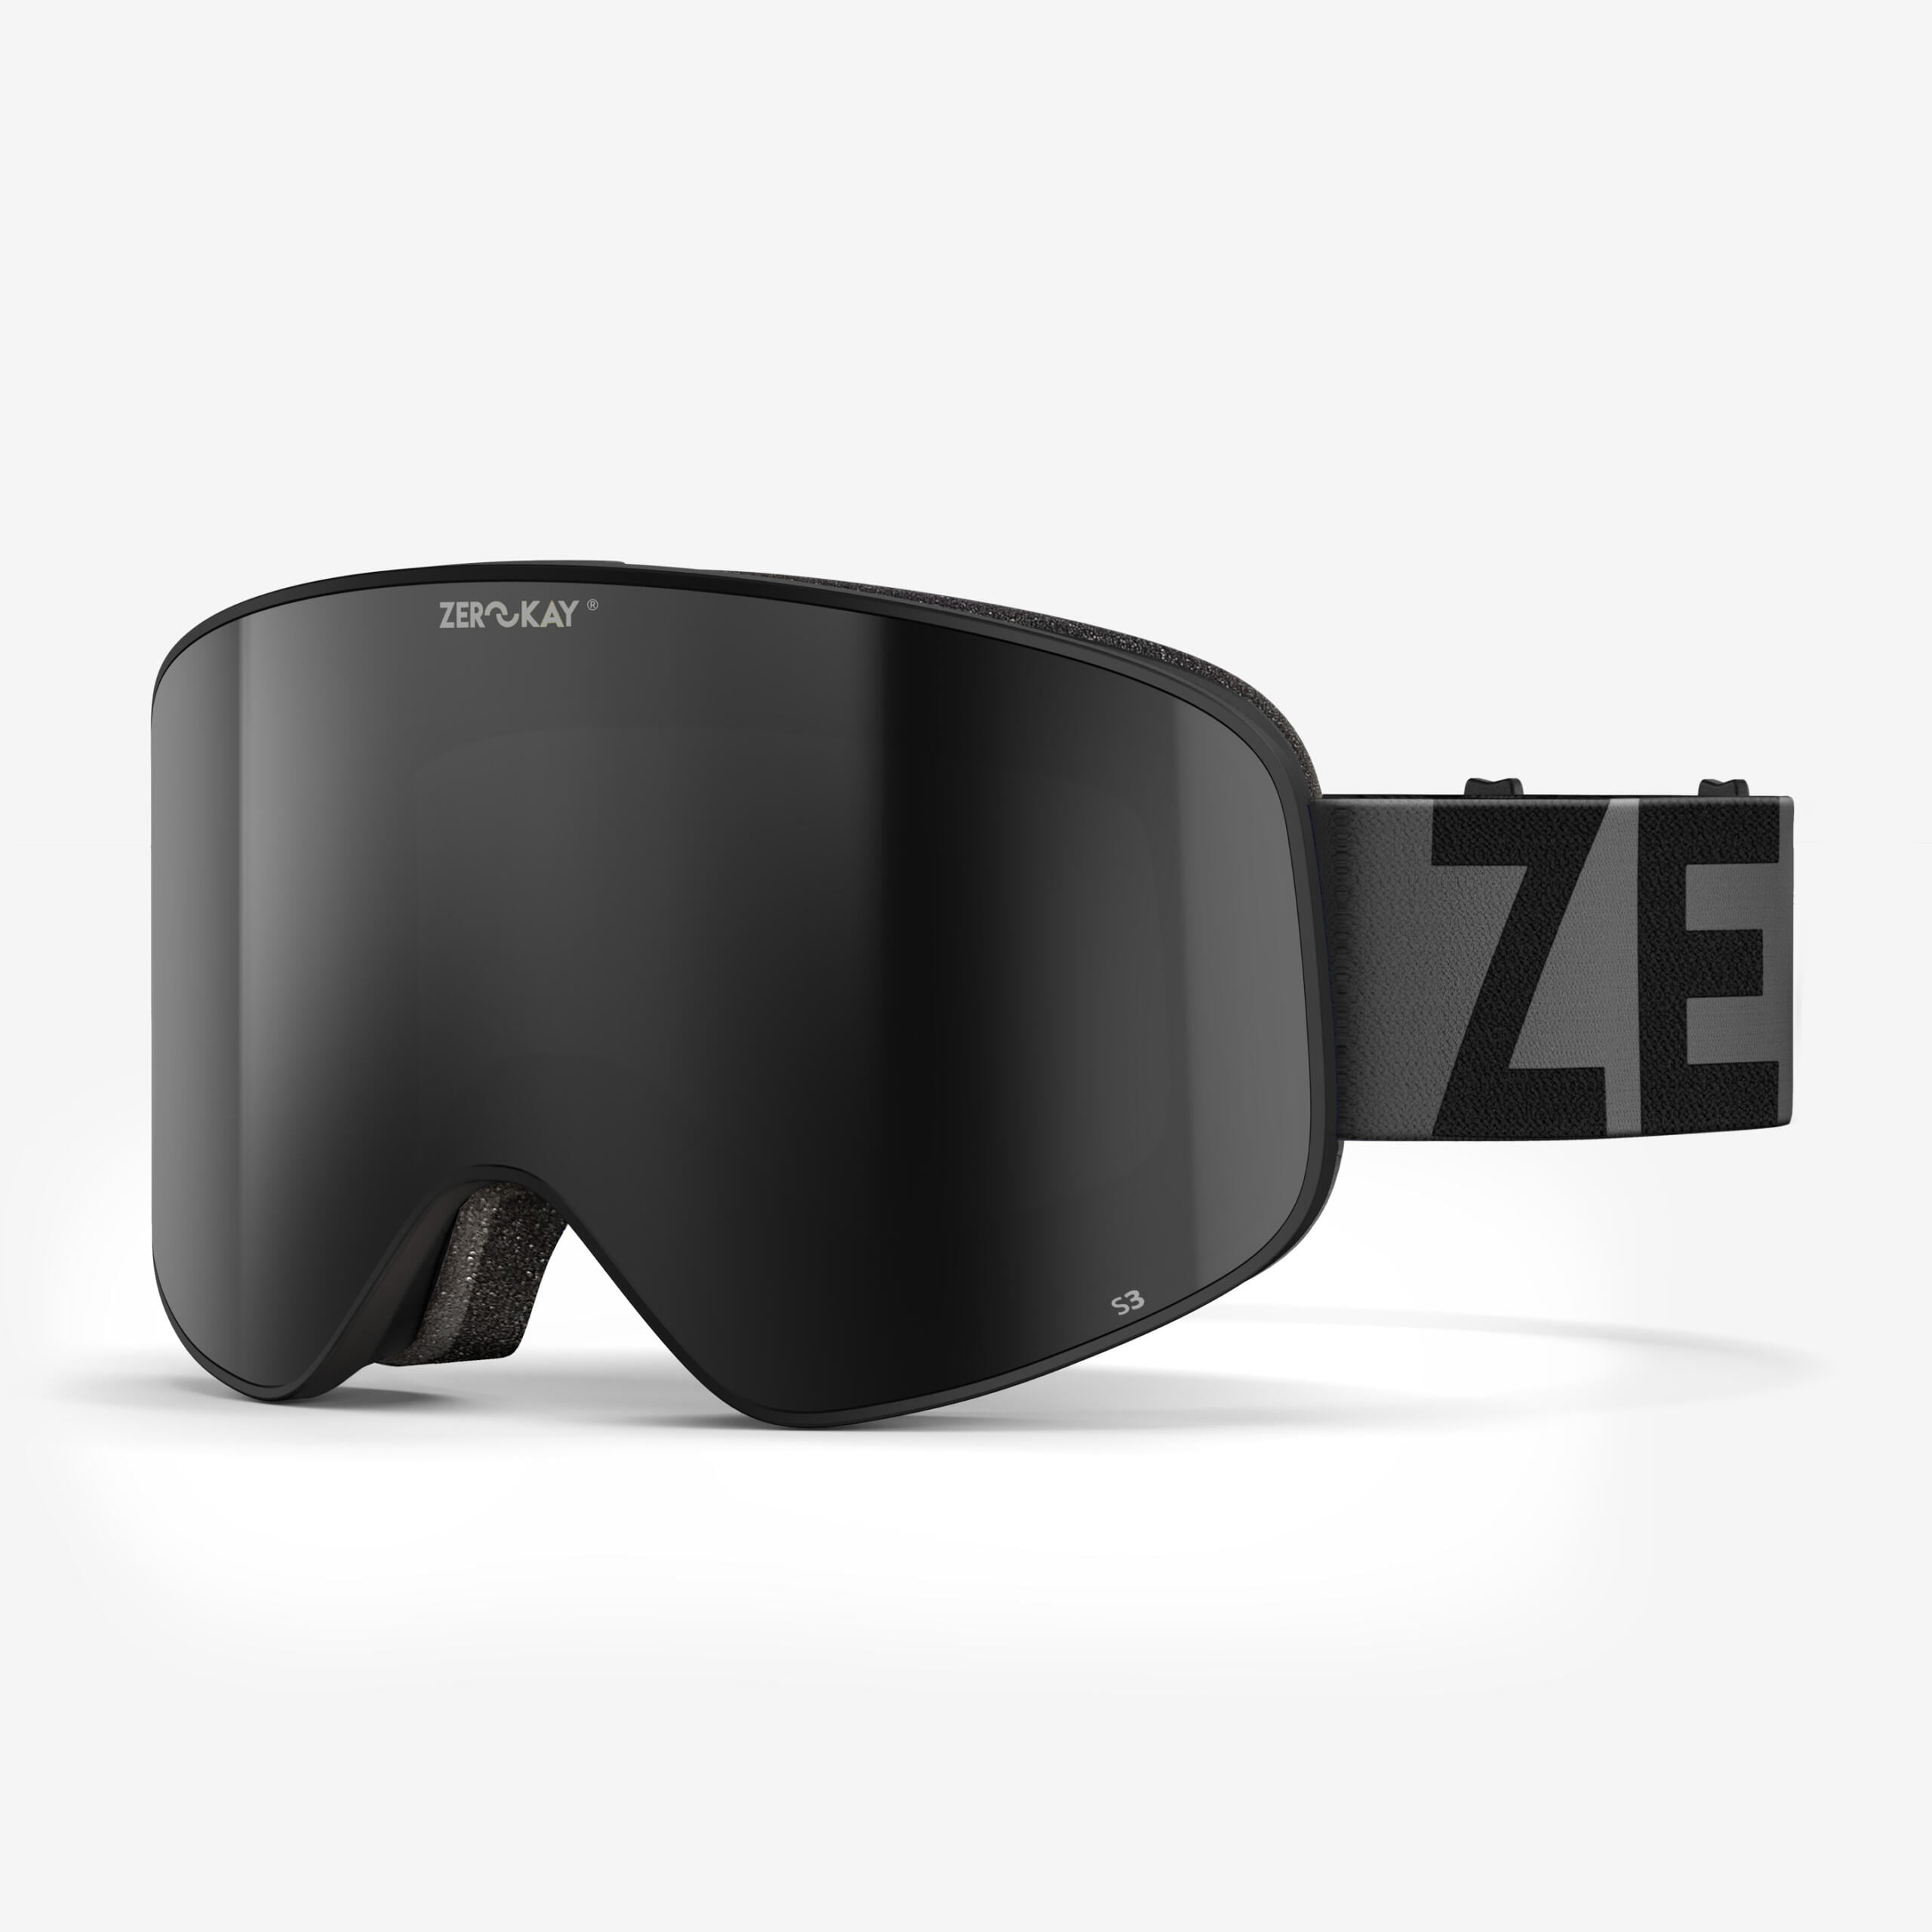 Zerokay Icon Ski Goggles with a black lens and black strap, featuring 3-layer antibacterial foam and anti-fog treatment for advanced vision and comfort.